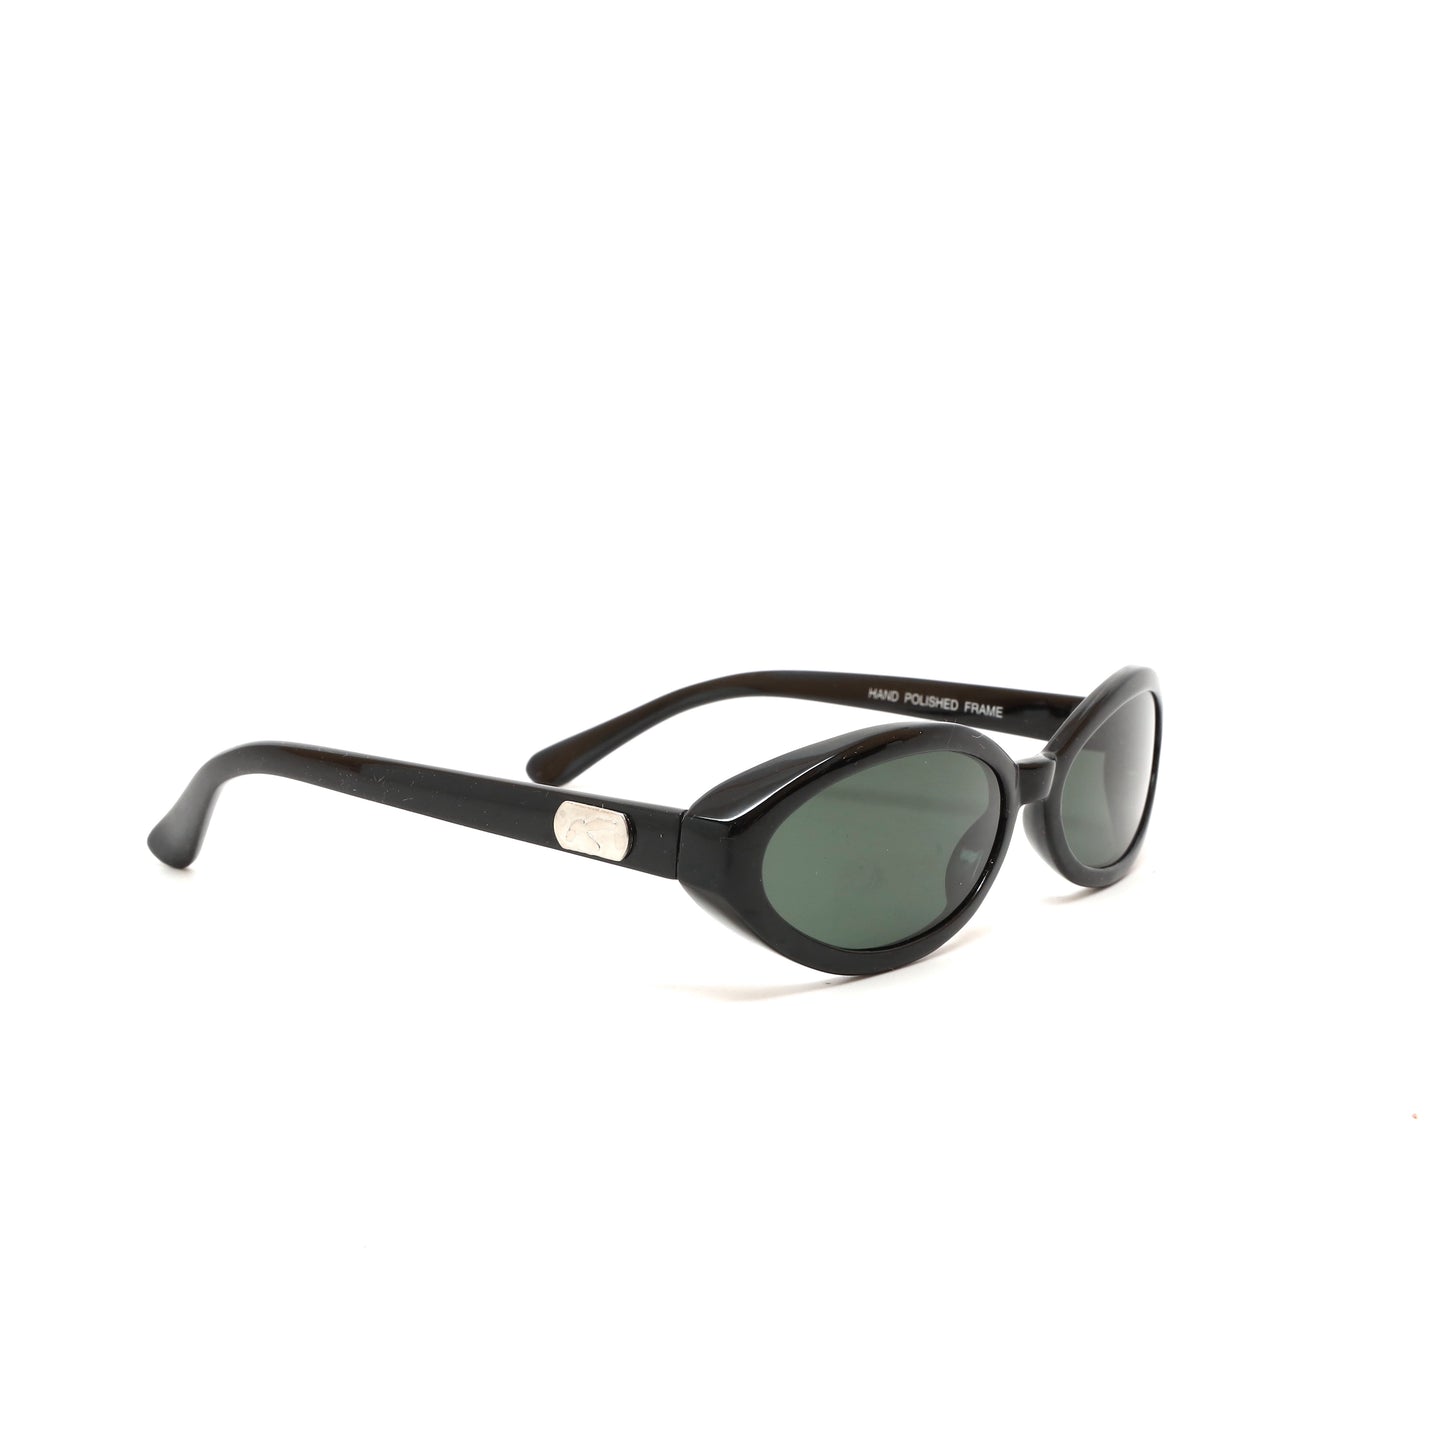 Deluxe Vintage 90s Deadstock High Quality Oval Sunglasses - Black